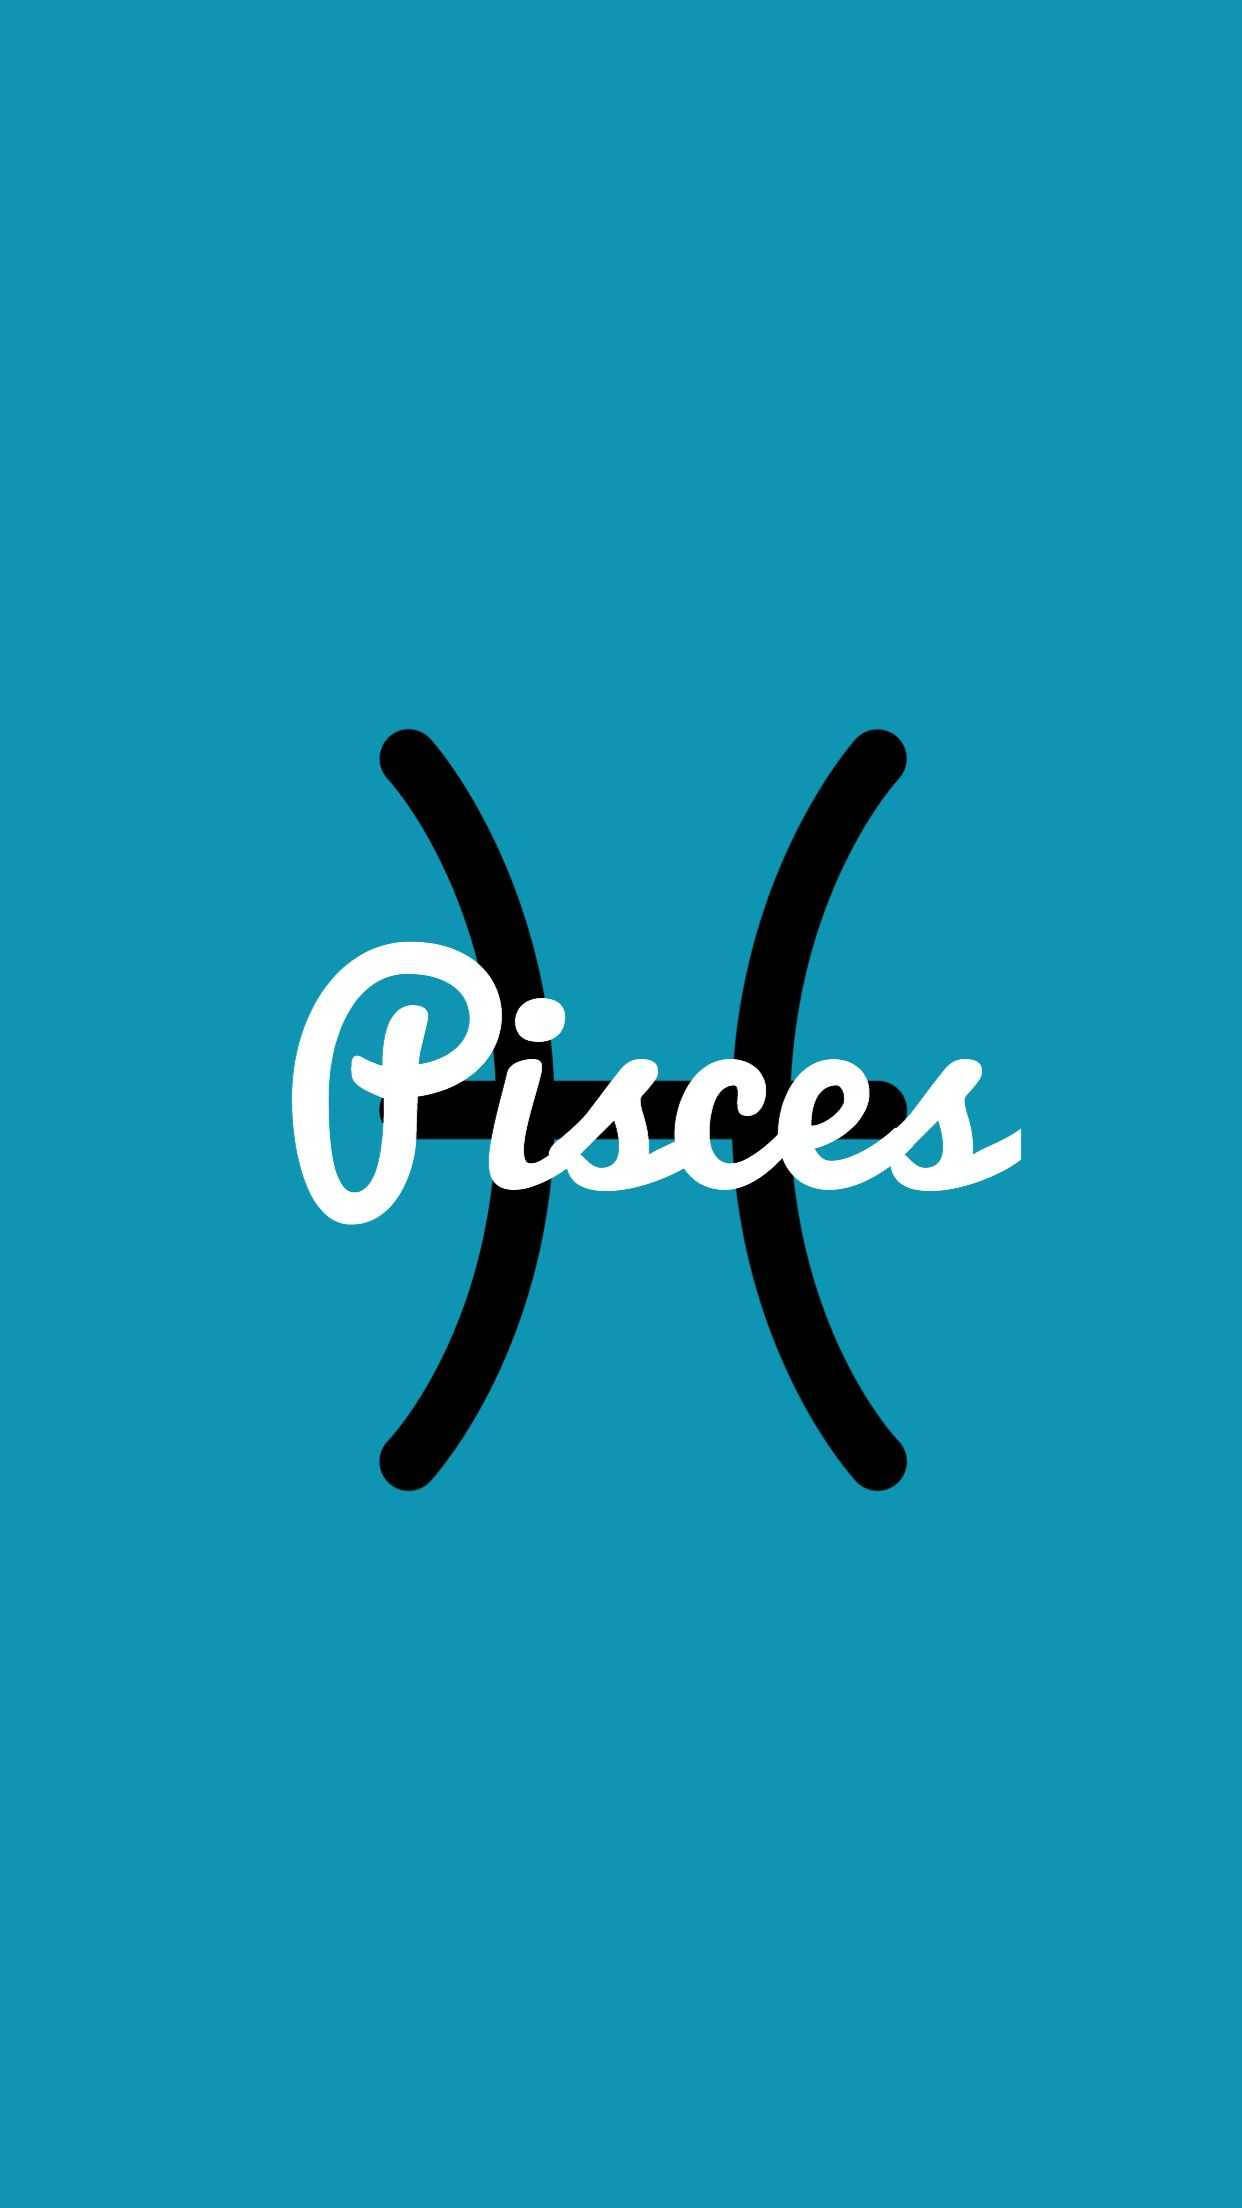 A logo for the zodiac sign pisces - Pisces